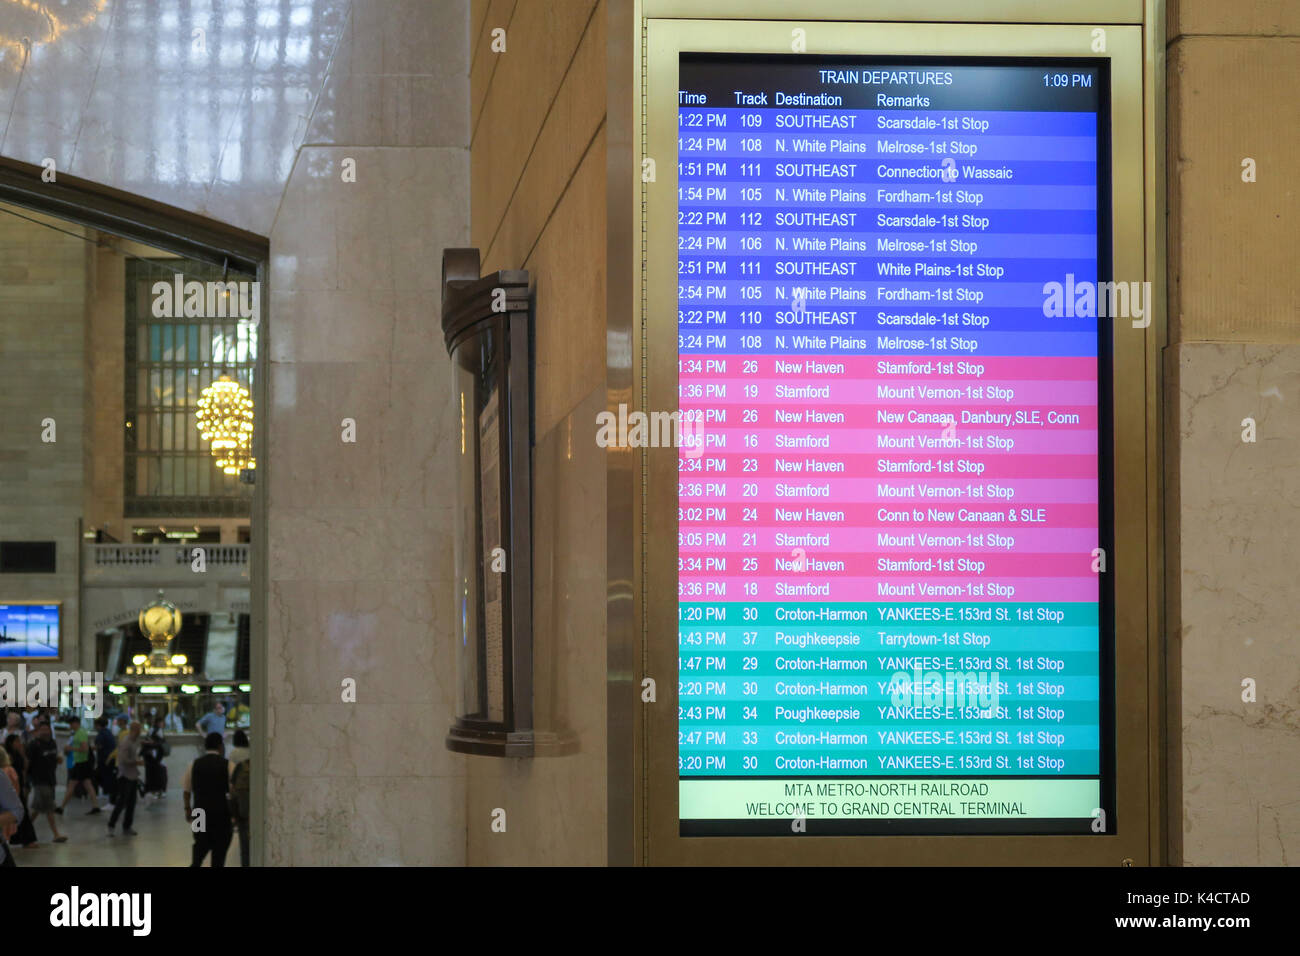 Train Departures Board in Grand Central Terminal, NYC, USA Stock Photo